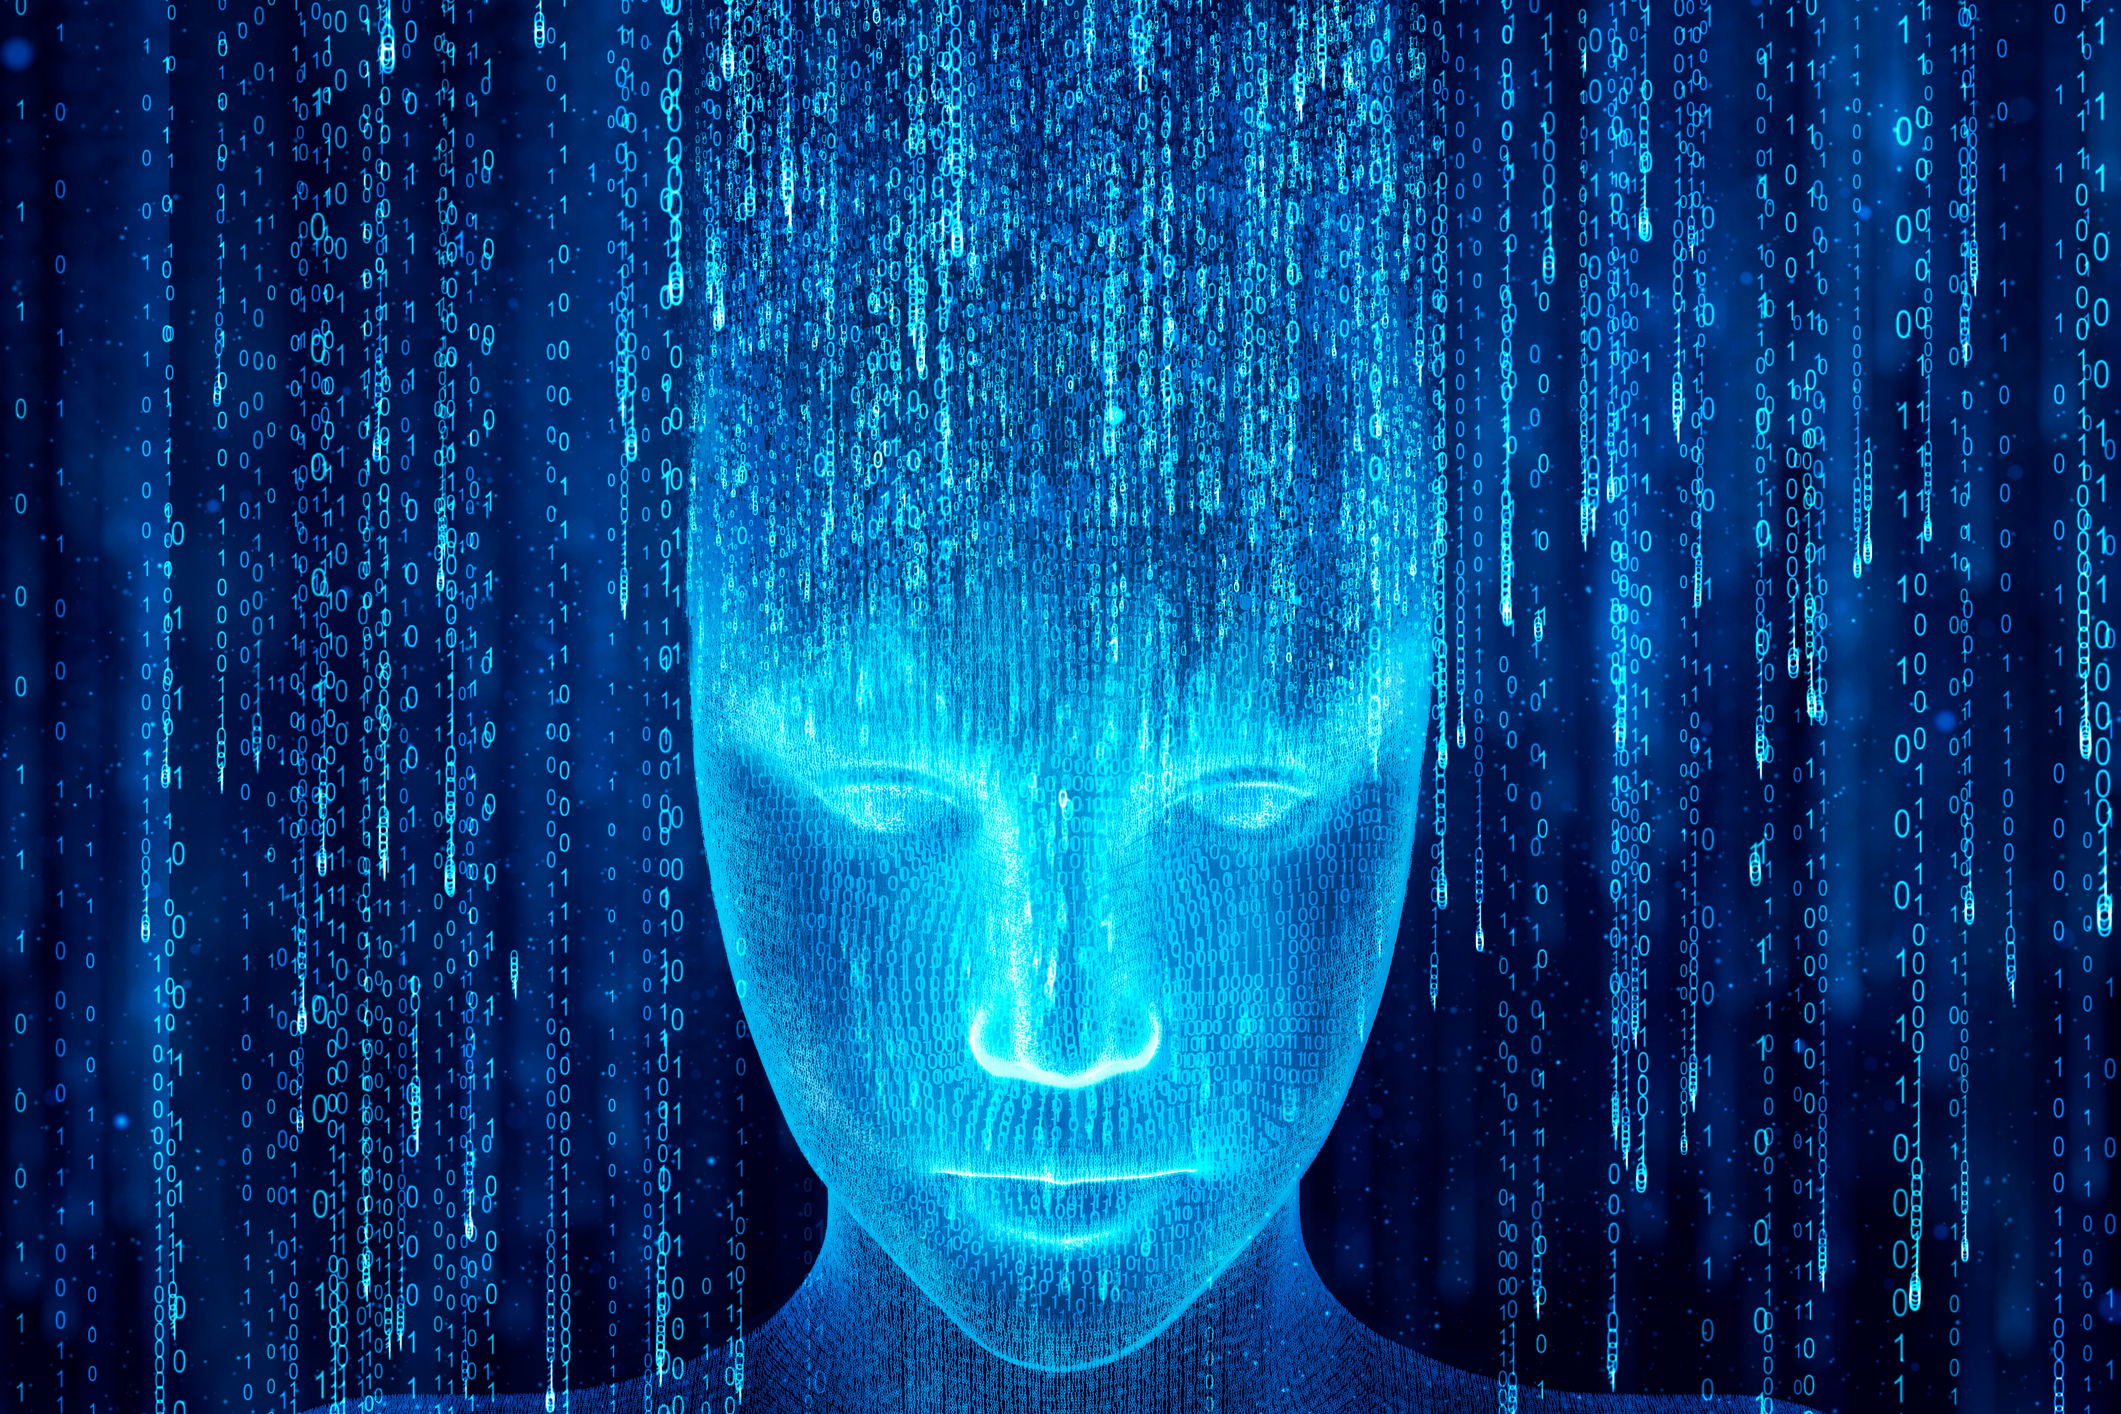 Digital graphic of a face with streaming binary code, symbolizing data or AI